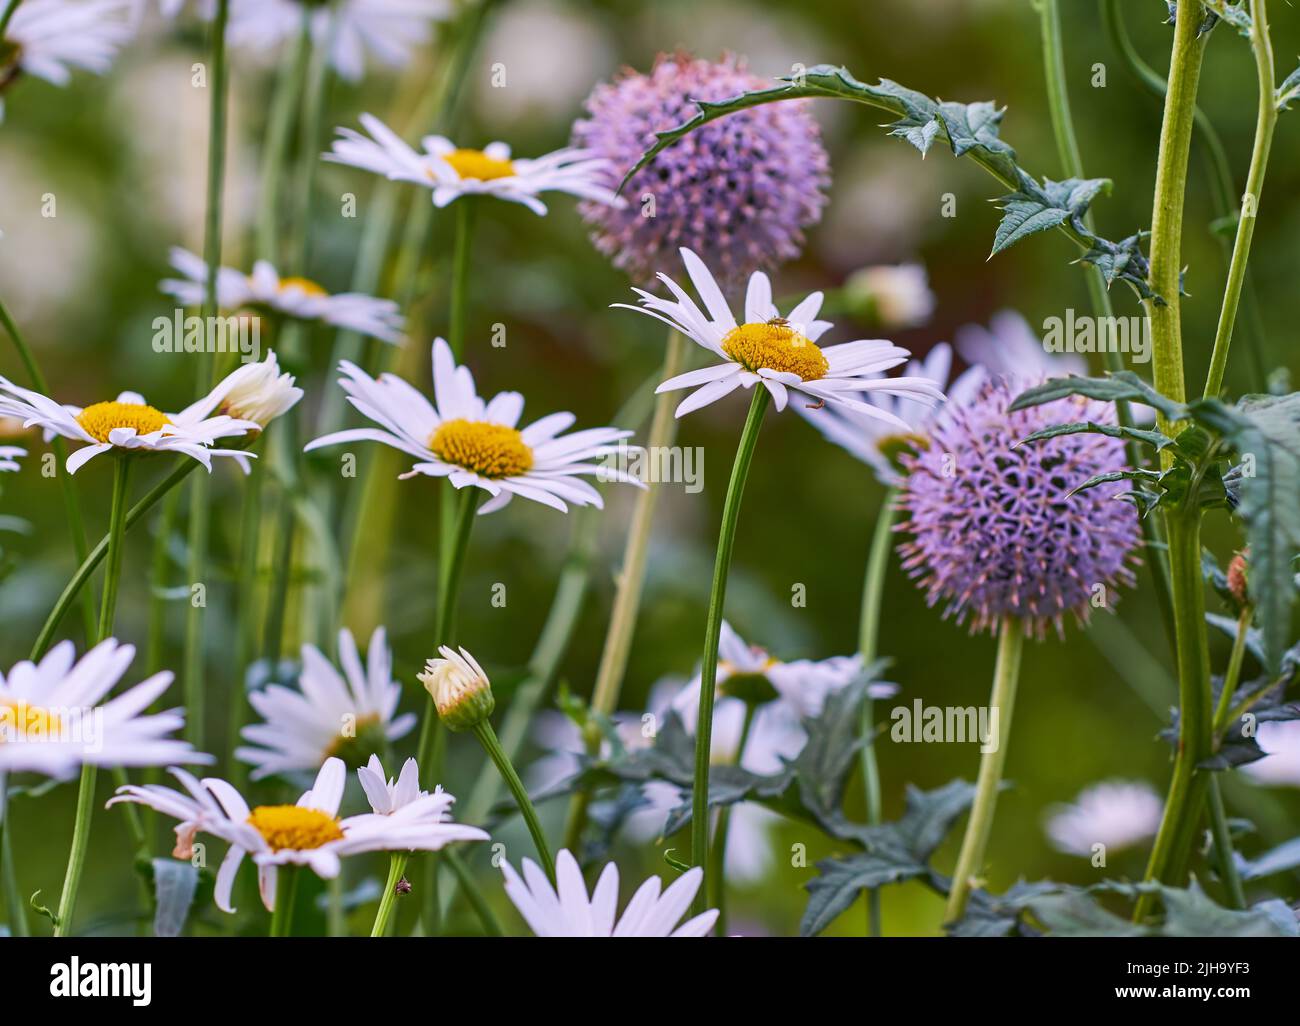 Closeup of white daisies and purple globe thistles growing in remote field, meadow or home backyard garden. Marguerite daisy flowers or argyranthemum Stock Photo